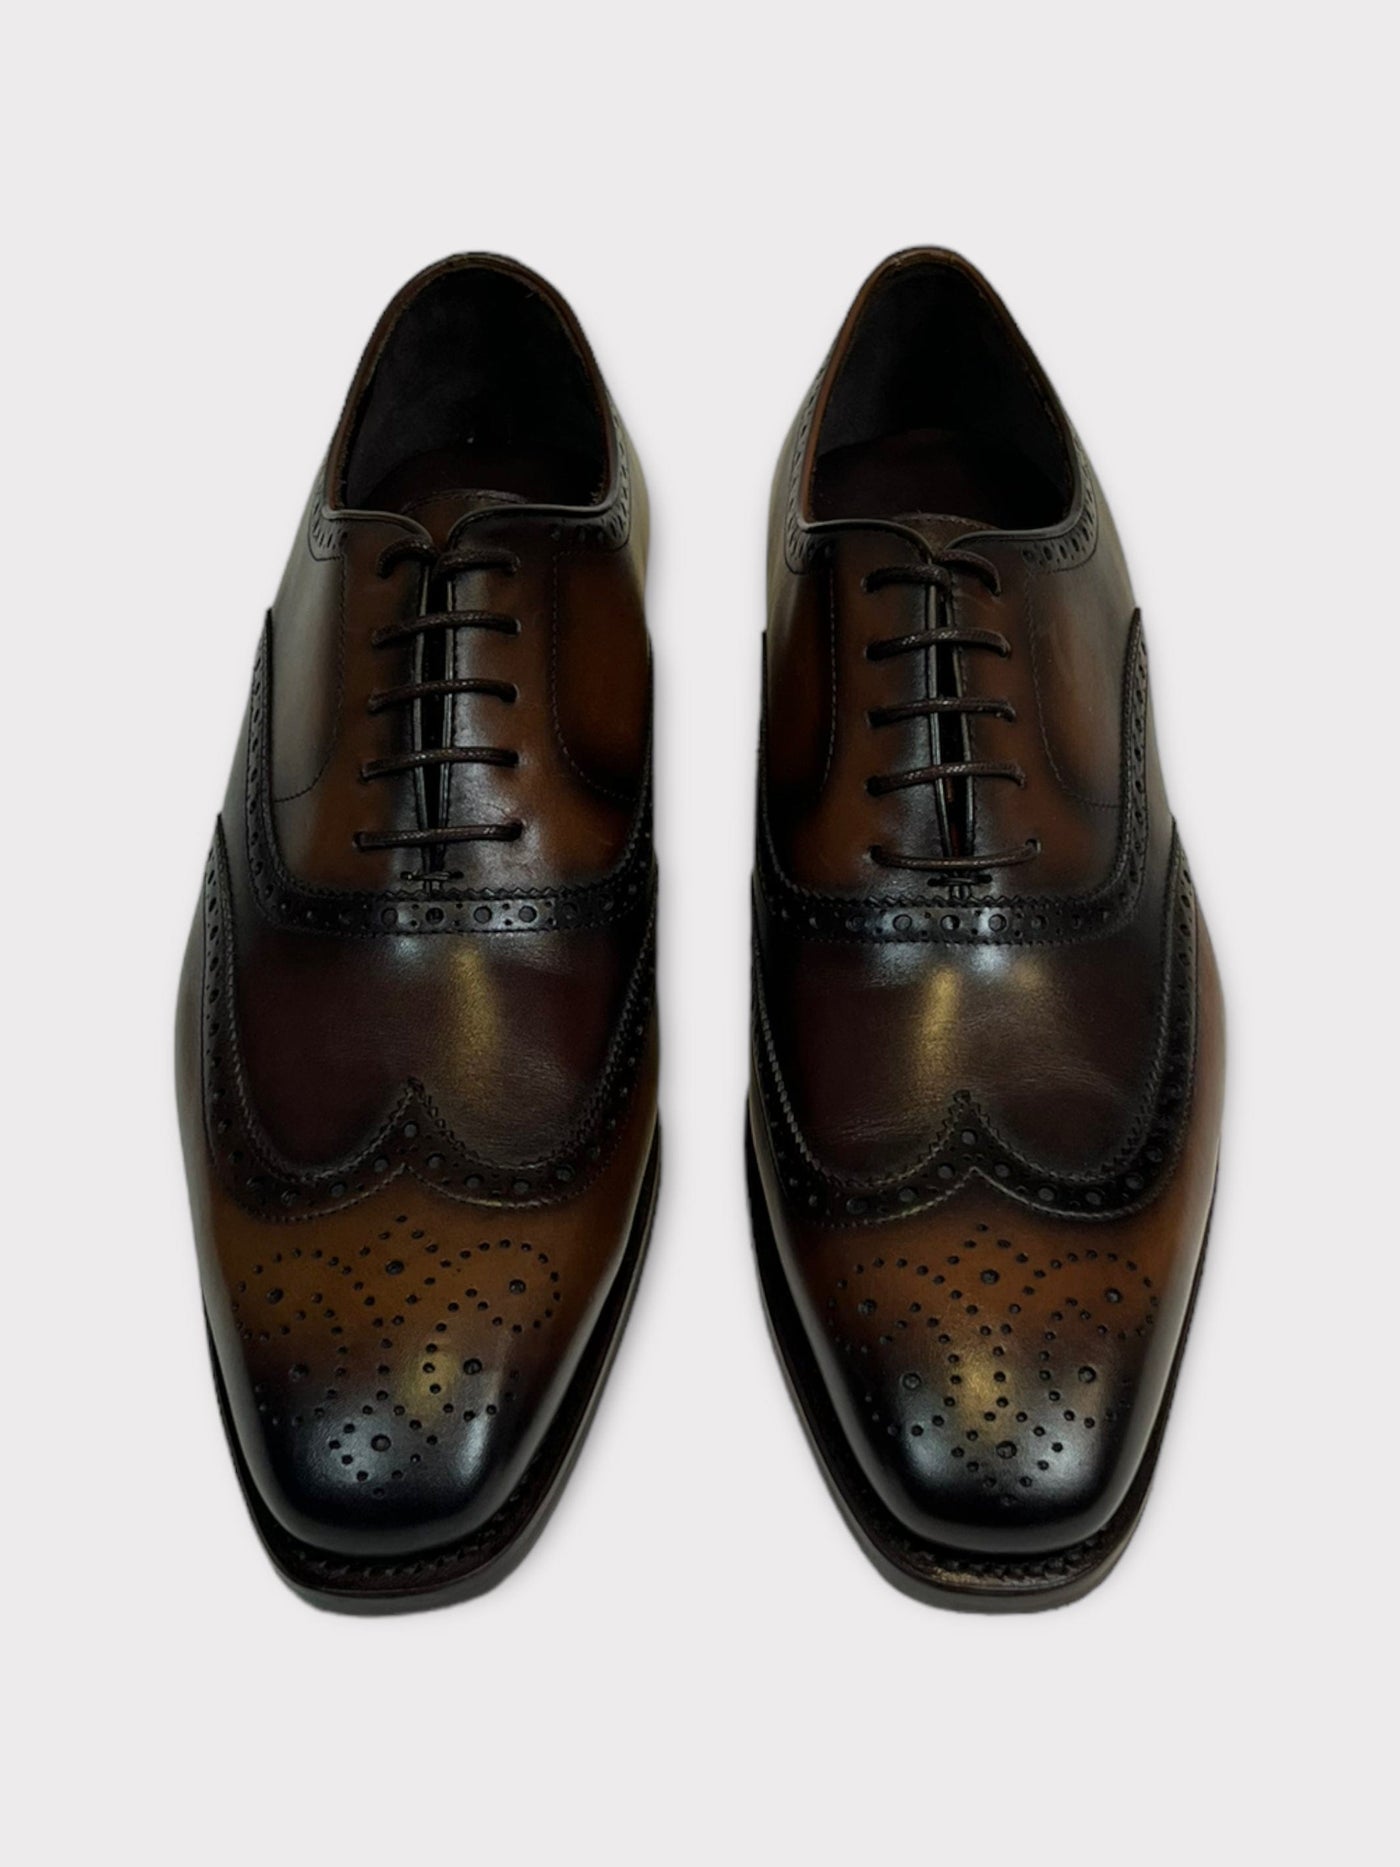 Brown Hand-Stitched Shoes